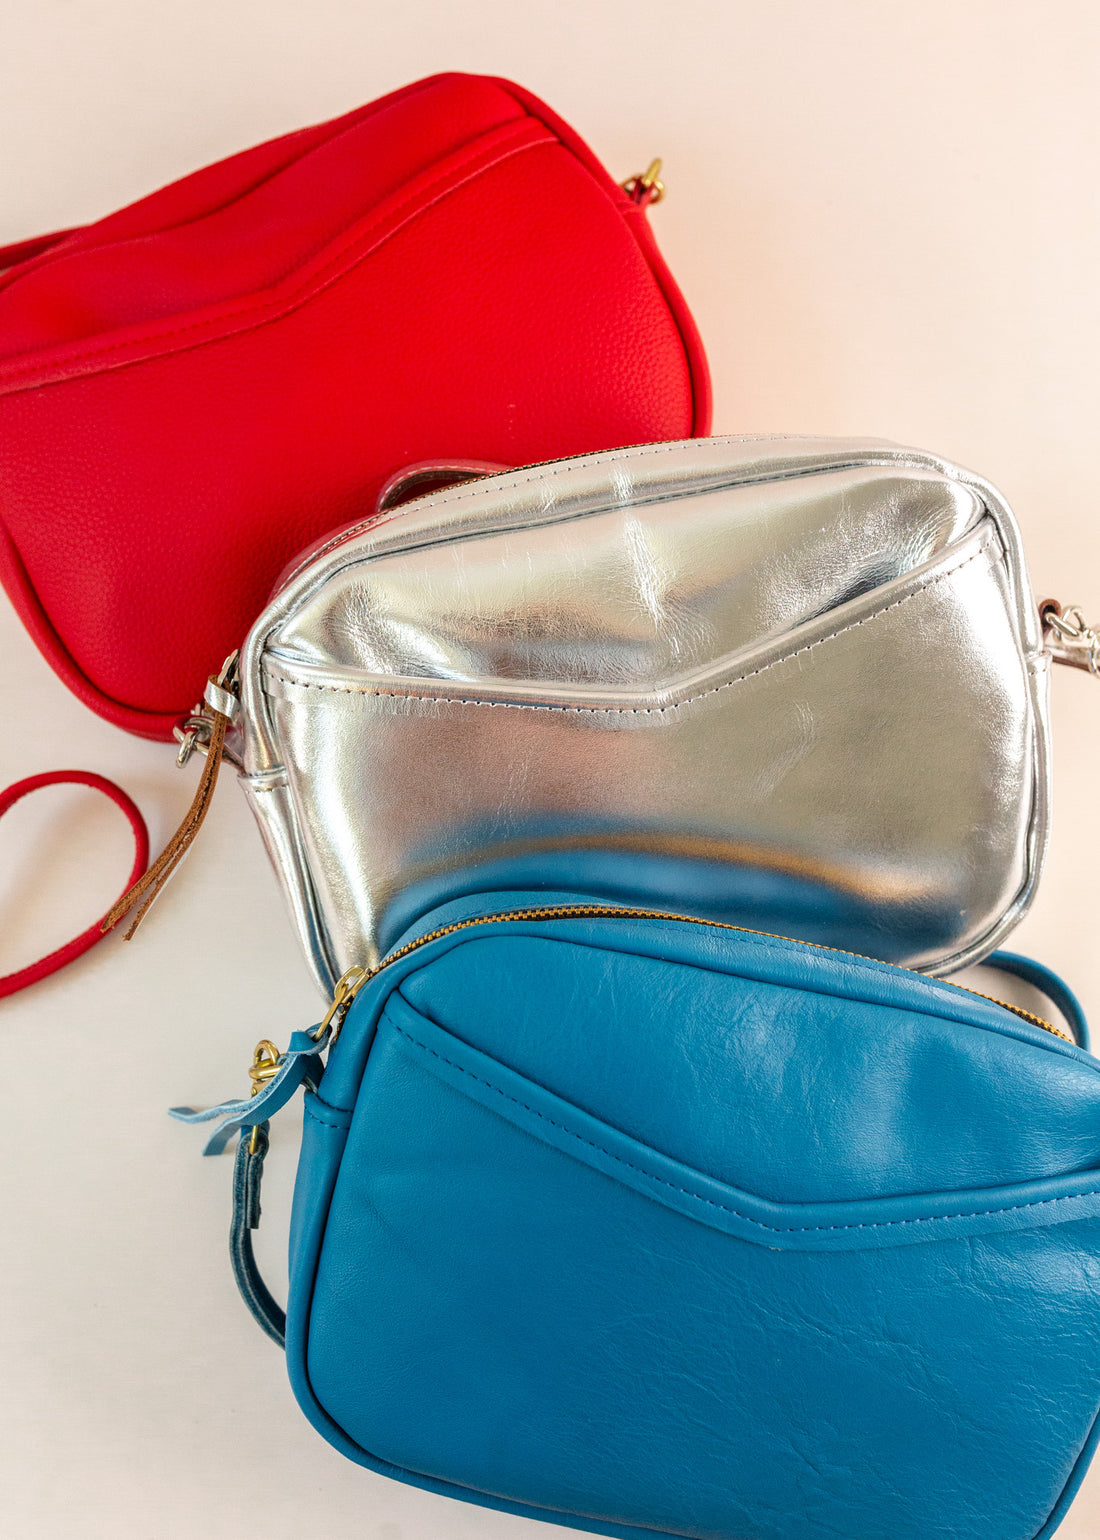 Three bags layered together in cherry, silver and azure.